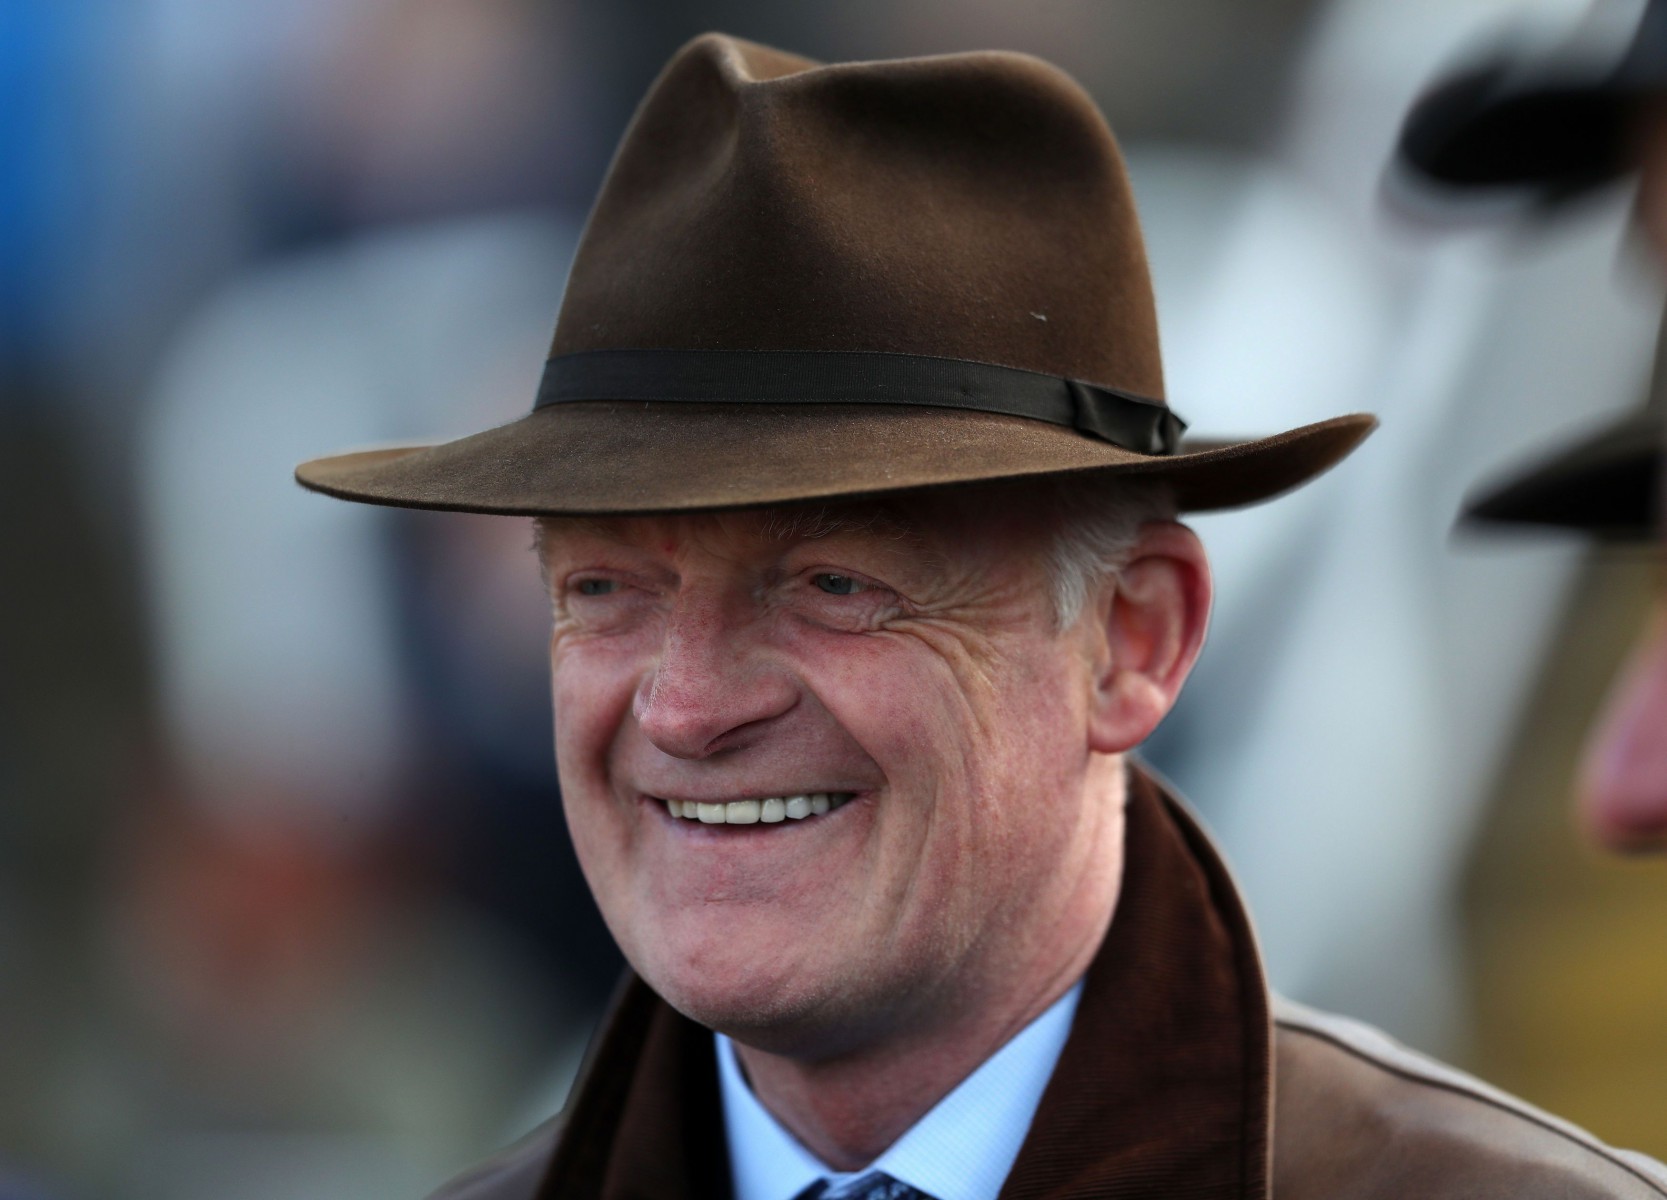 , Willie Mullins conquers Market Rasen with exciting filly Panic Attack